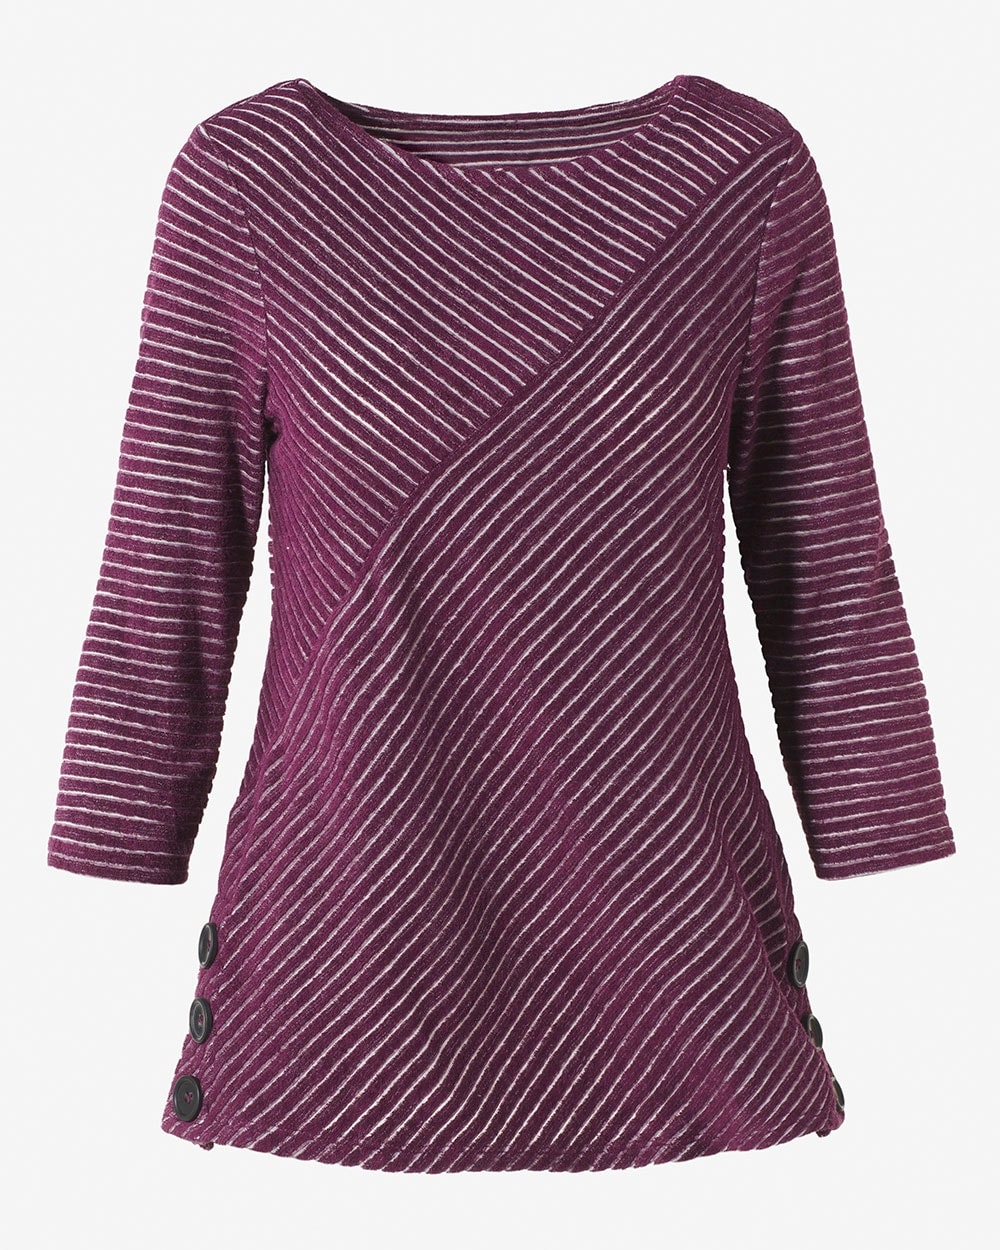 Angled Lines Spliced Boatneck Tunic